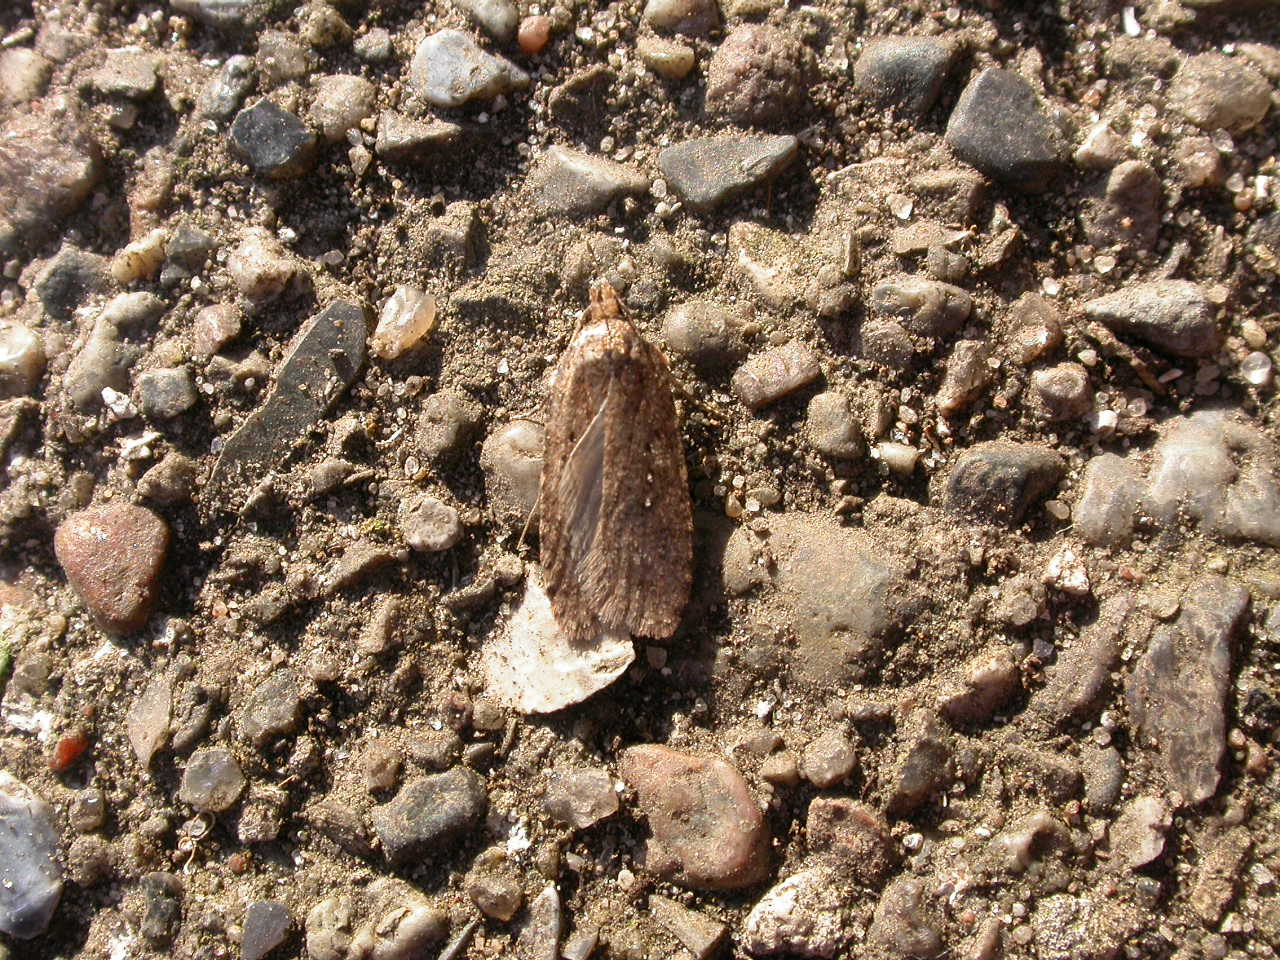 a bug is walking on the ground among some rocks